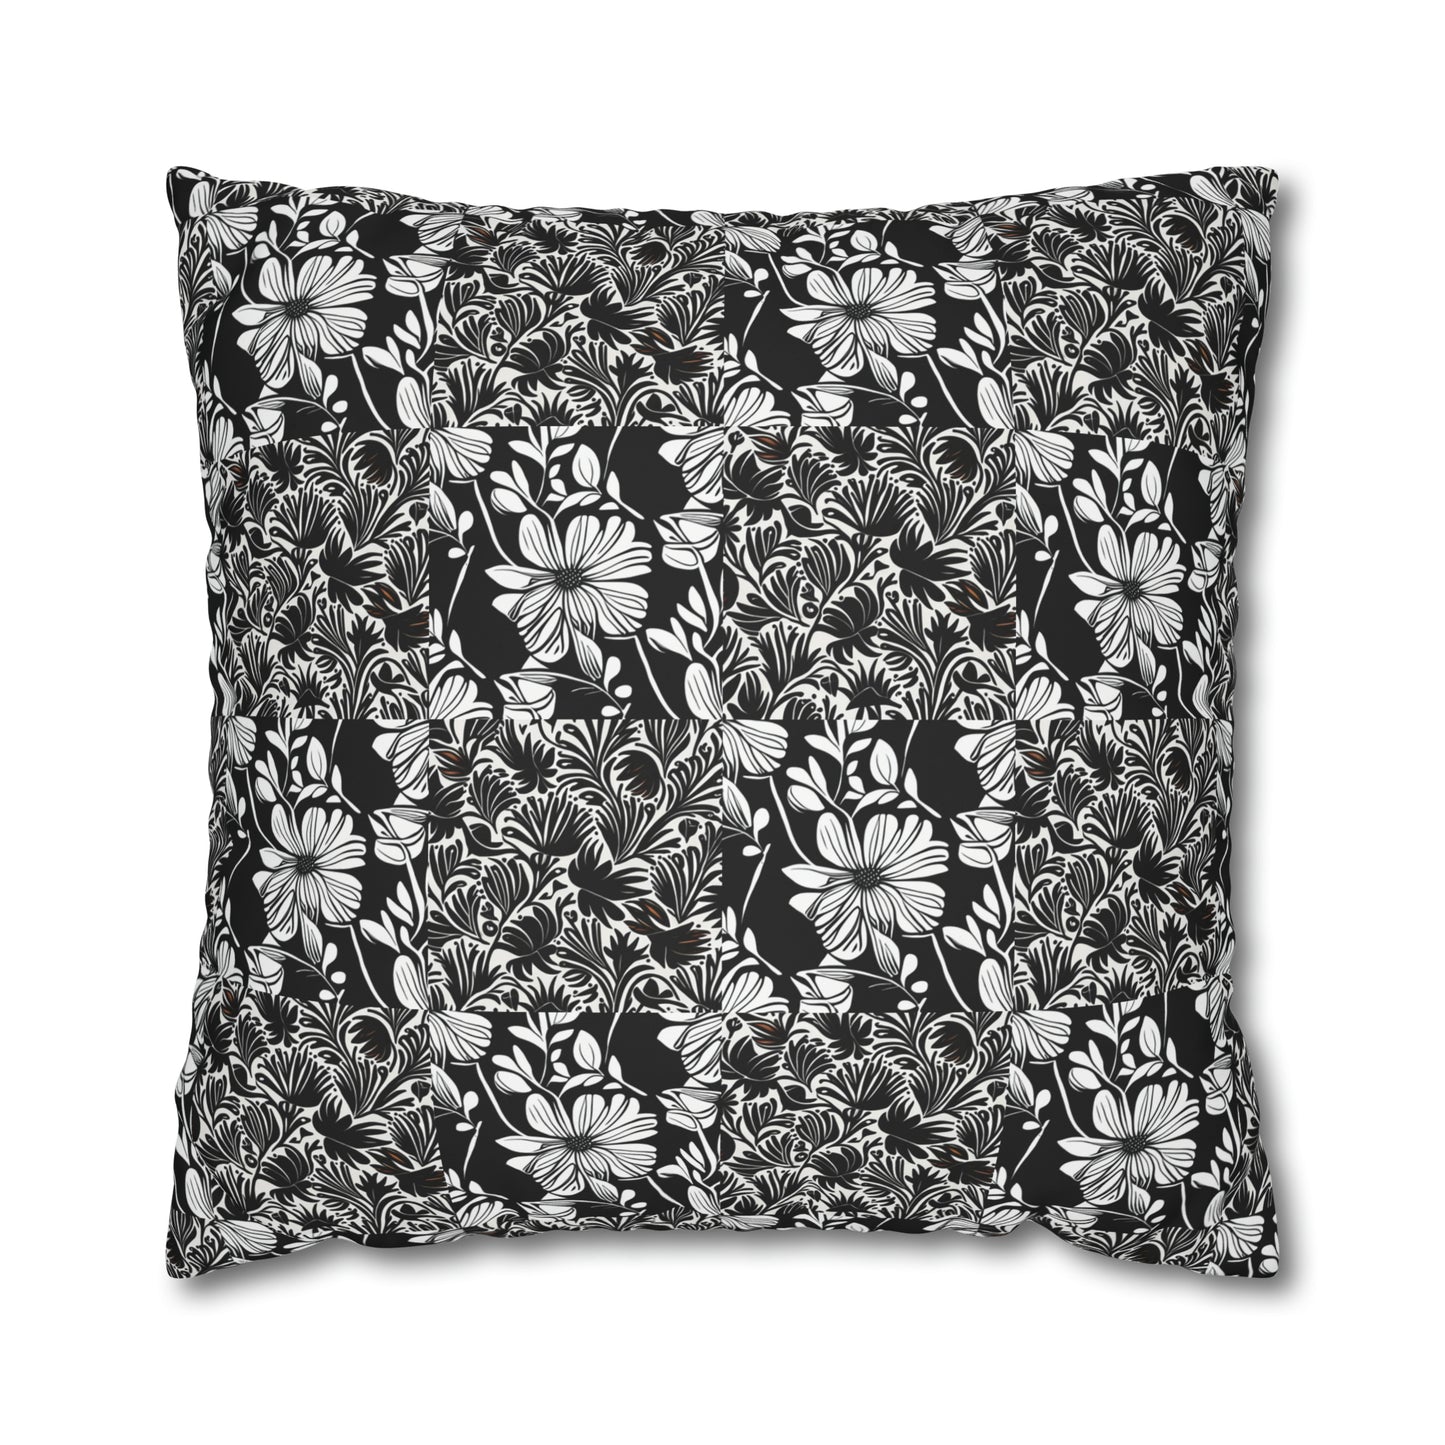 Black and White Floral Collage Pattern Decorative Spun Polyester Pillow Cover